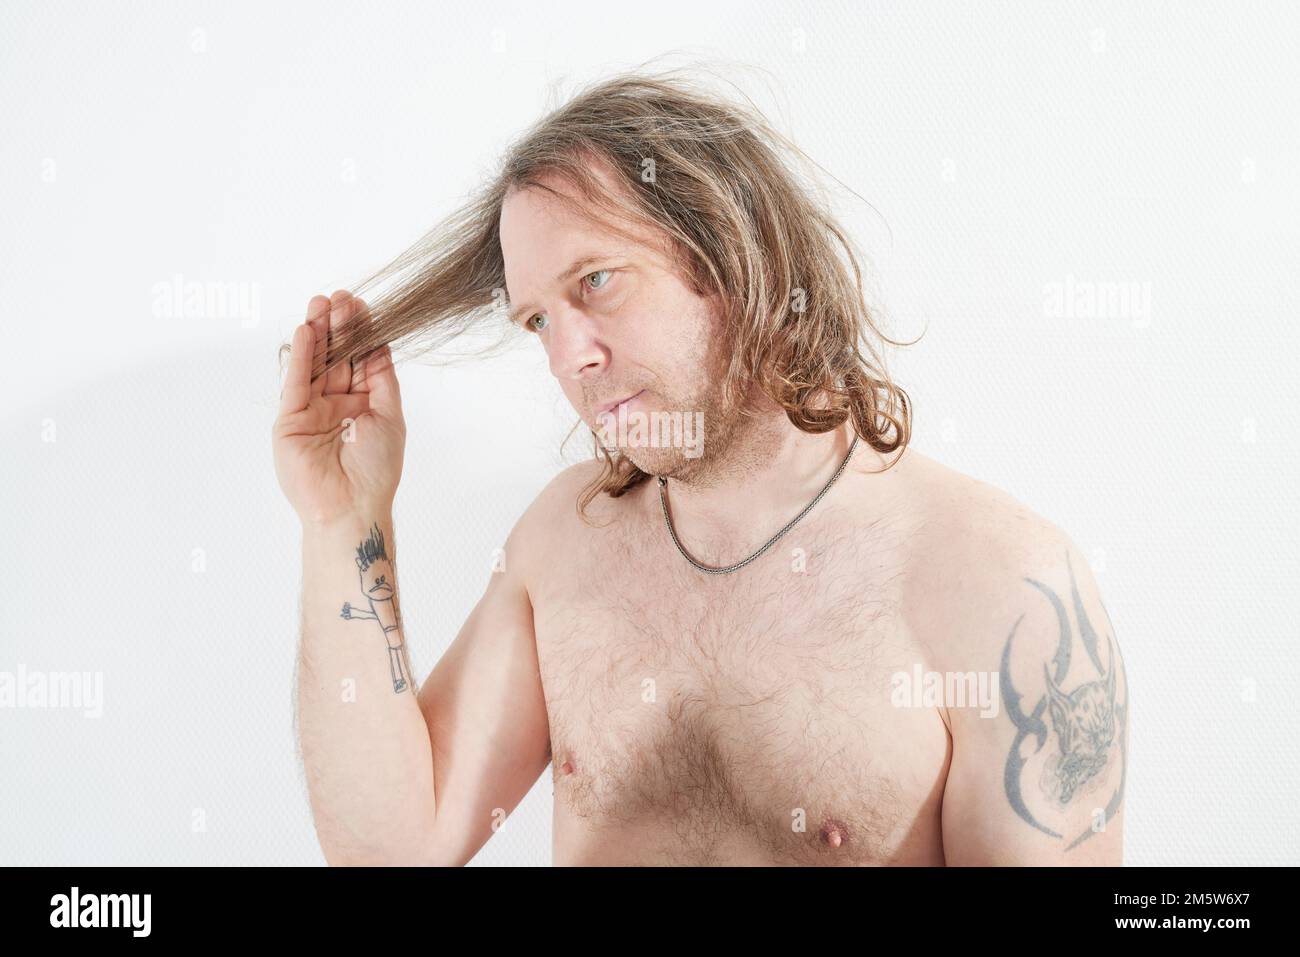 Man with hand on his long hair Stock Photo